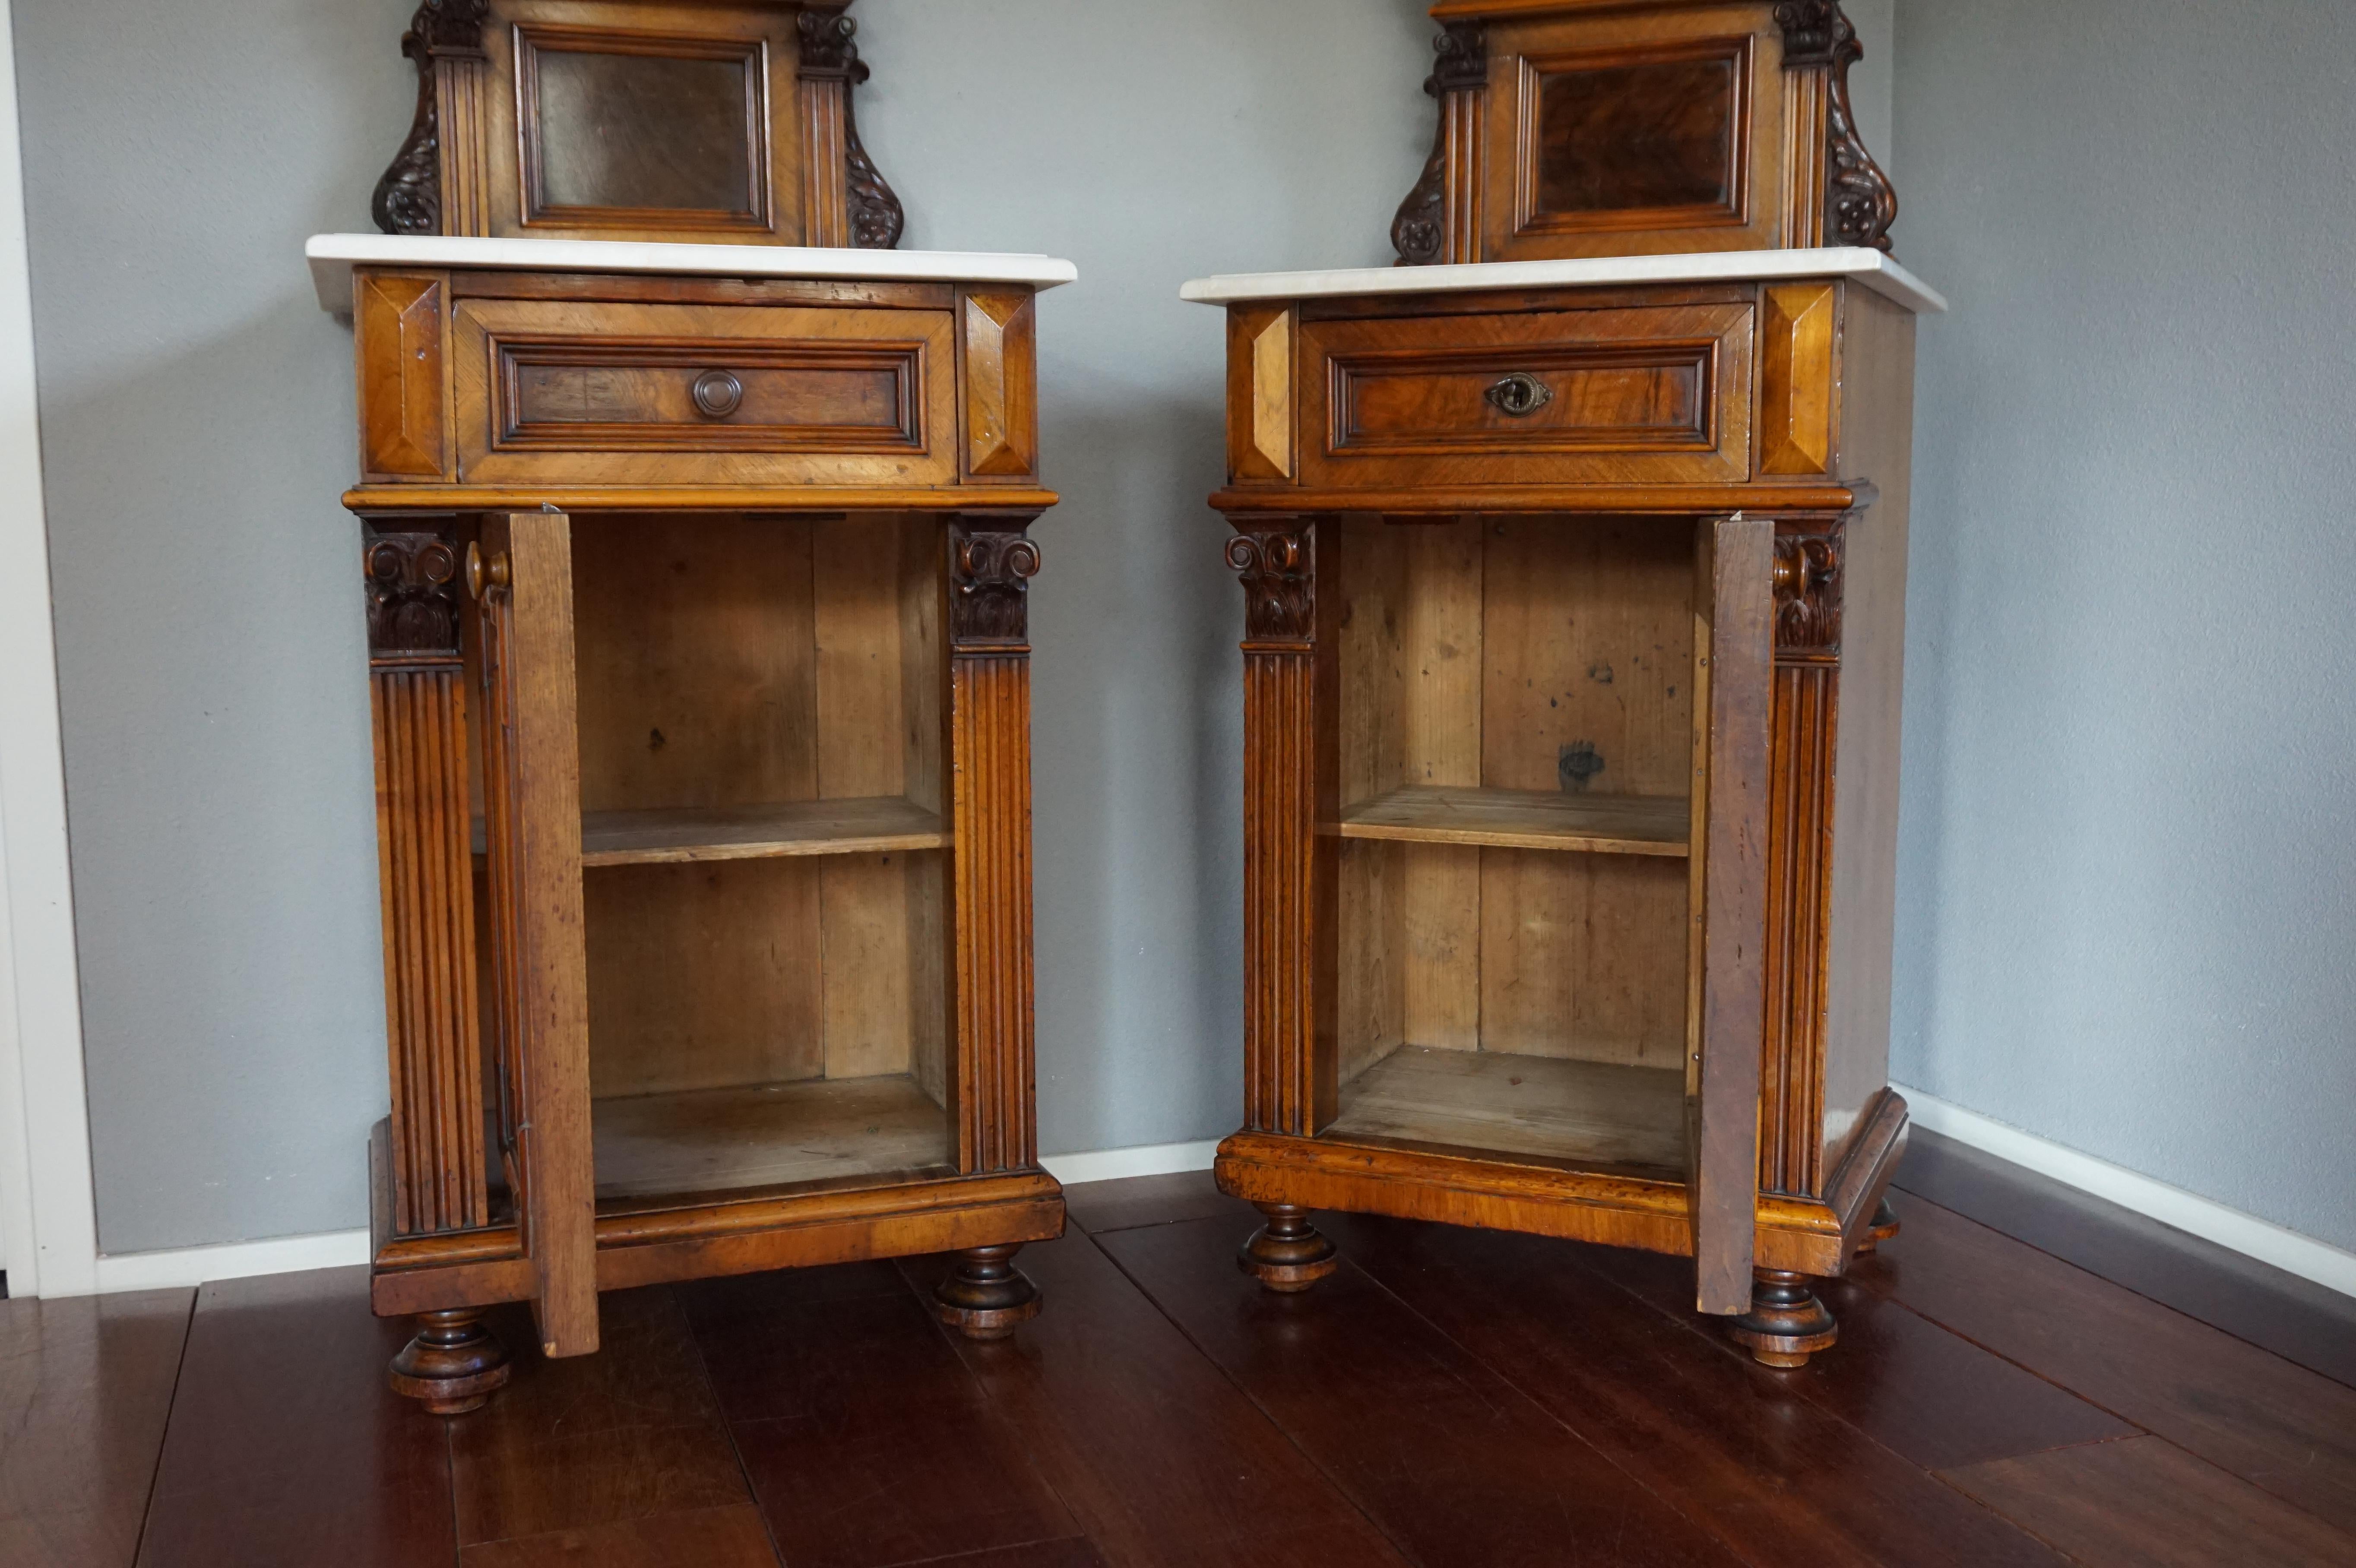 19th Century Rare Pair of Antique Victorian Night Stands / Bedside Cabinets with Marble Tops